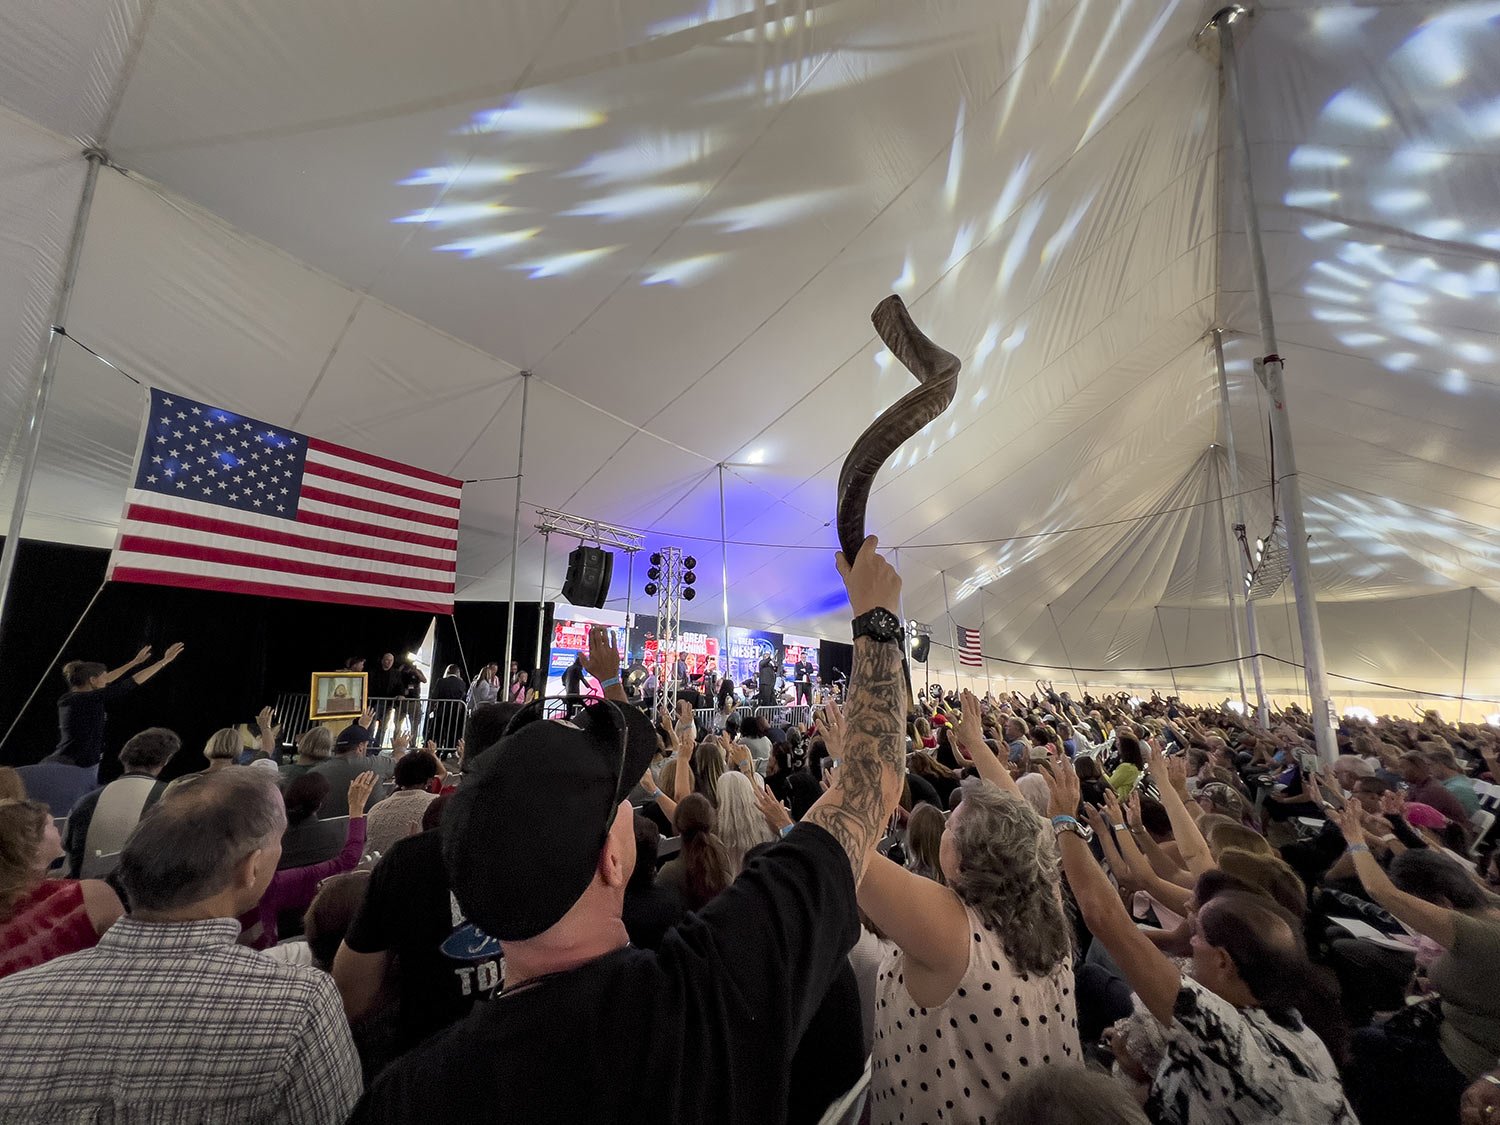  A man holds up a shofar as the audience prays inside a tent during the ReAwaken America Tour at Cornerstone Church in Batavia, N.Y., Aug. 12, 2022. The instrument, used in some Jewish worship services, has been adopted by the far right, and several 